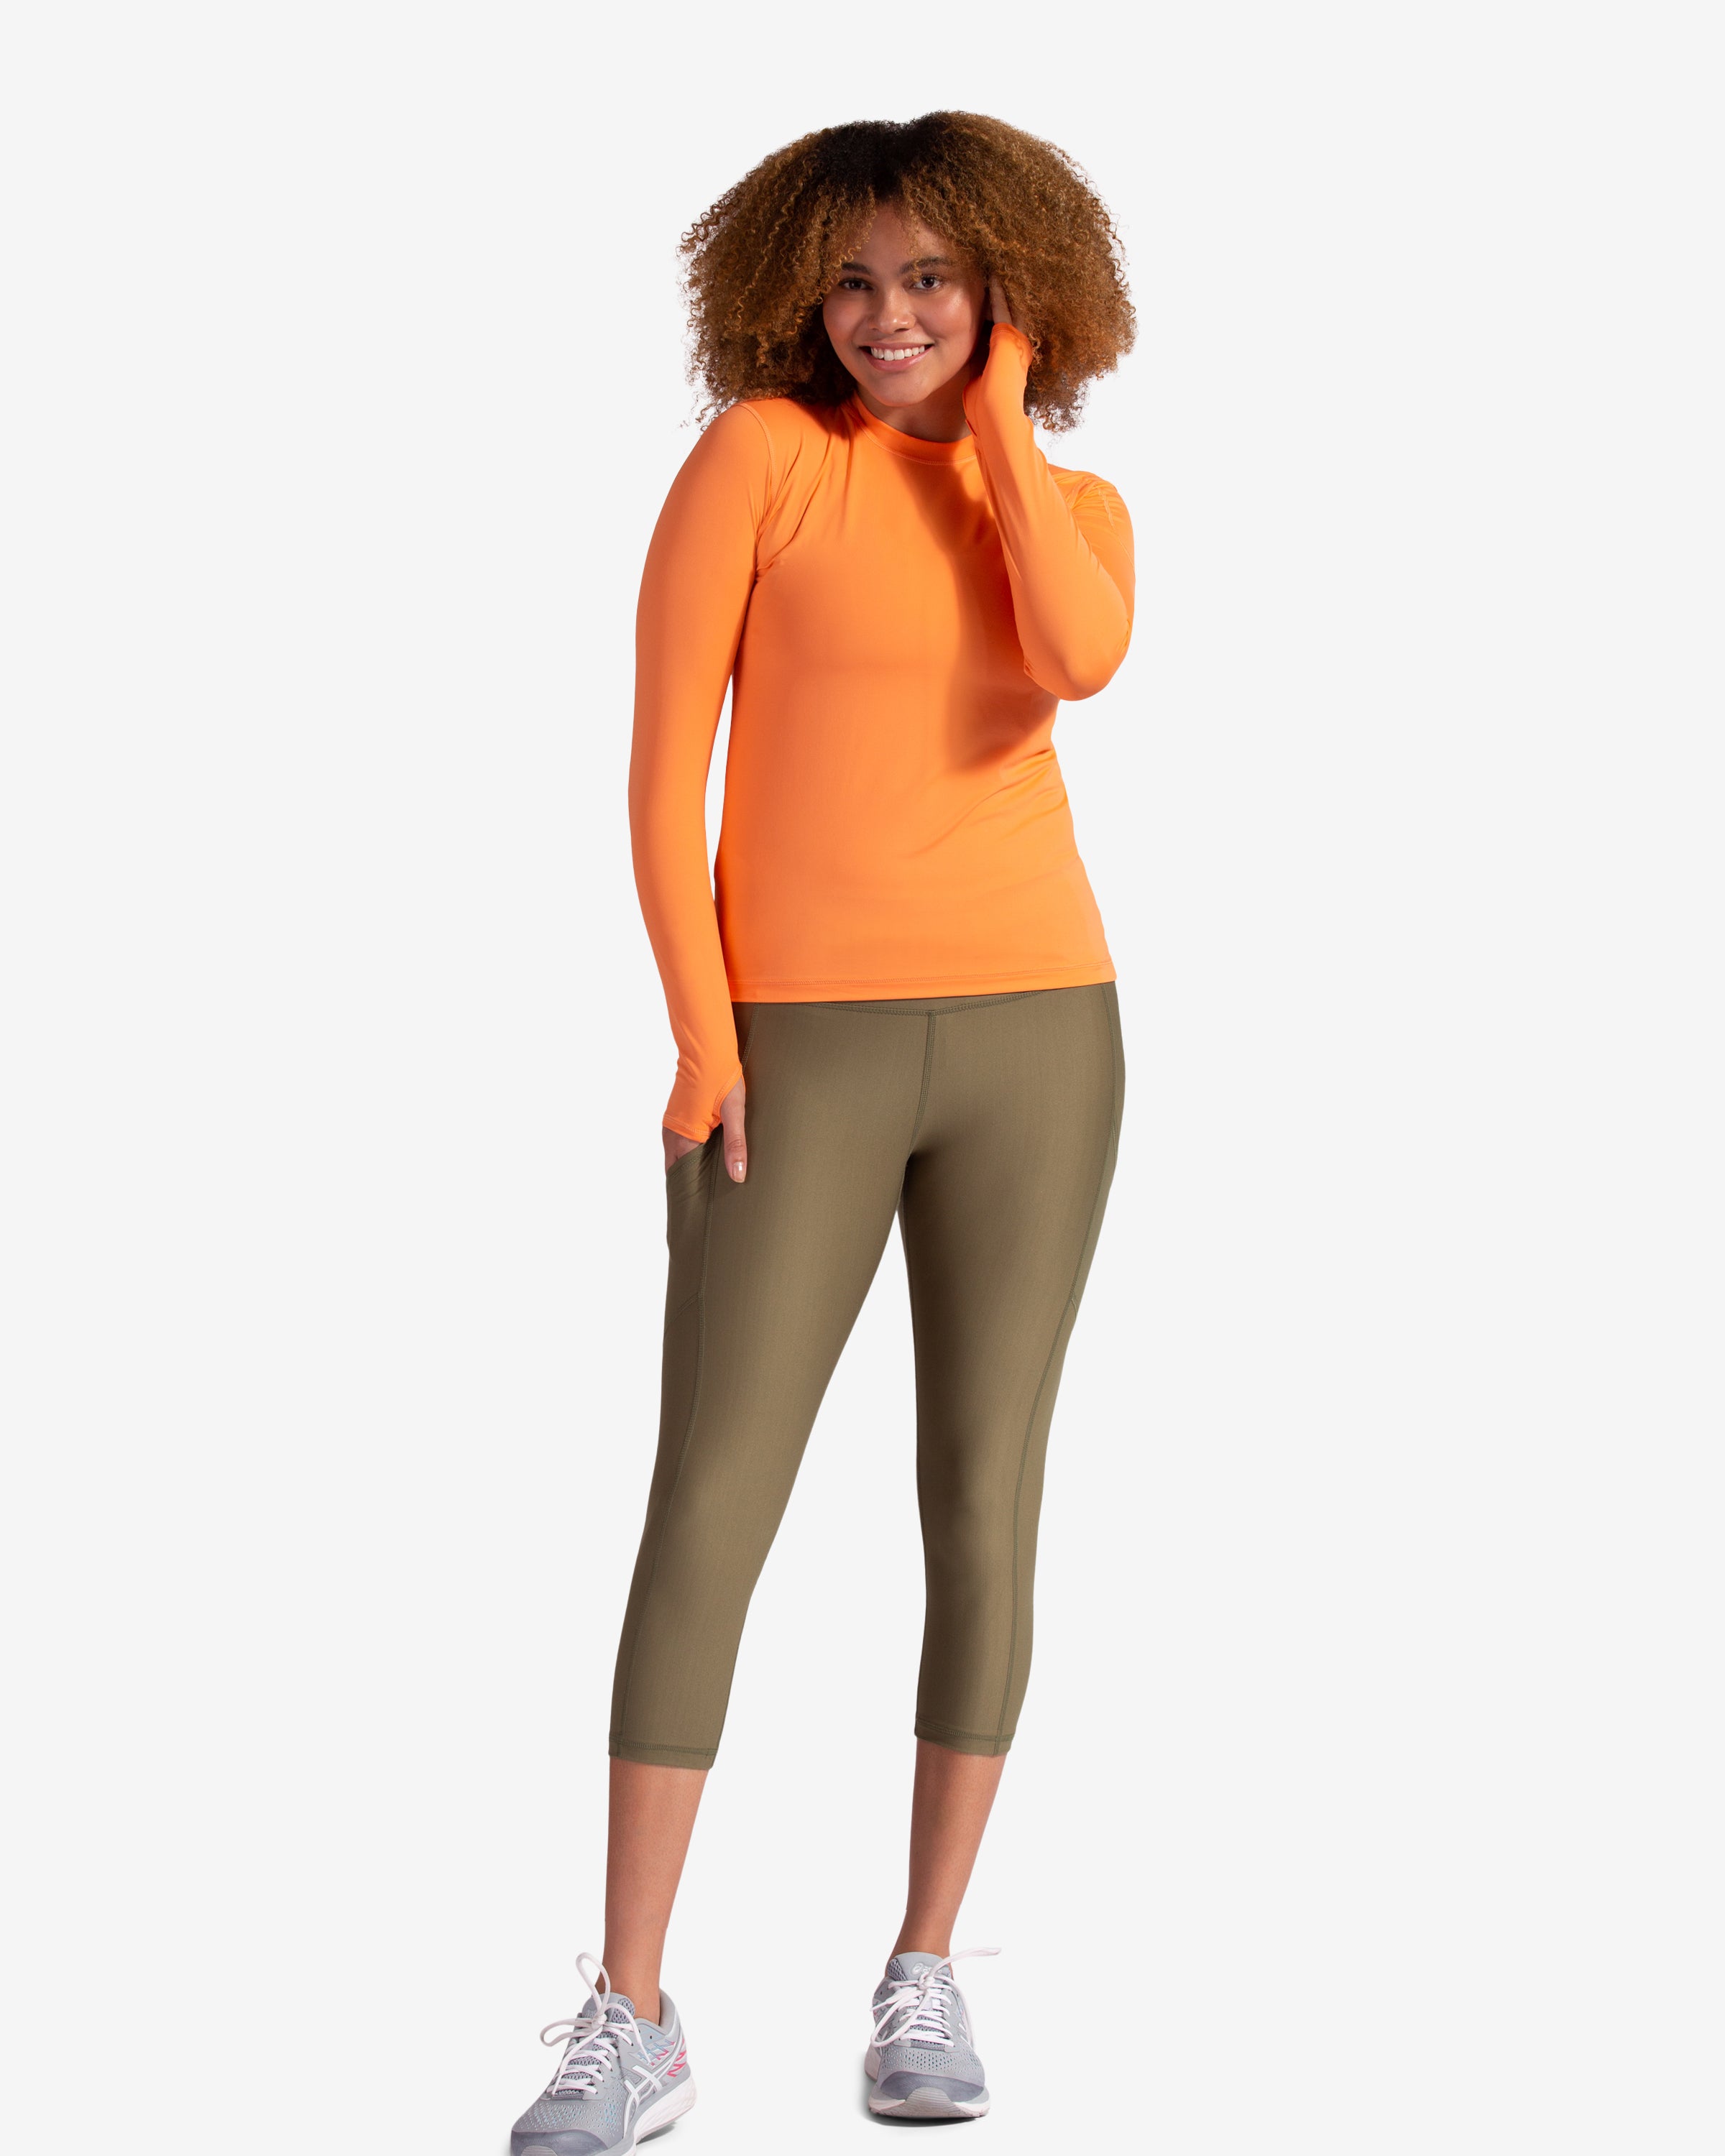 Colorful Sustainable Capri Yoga Pants with Pockets, Eco-Friendly Leggings